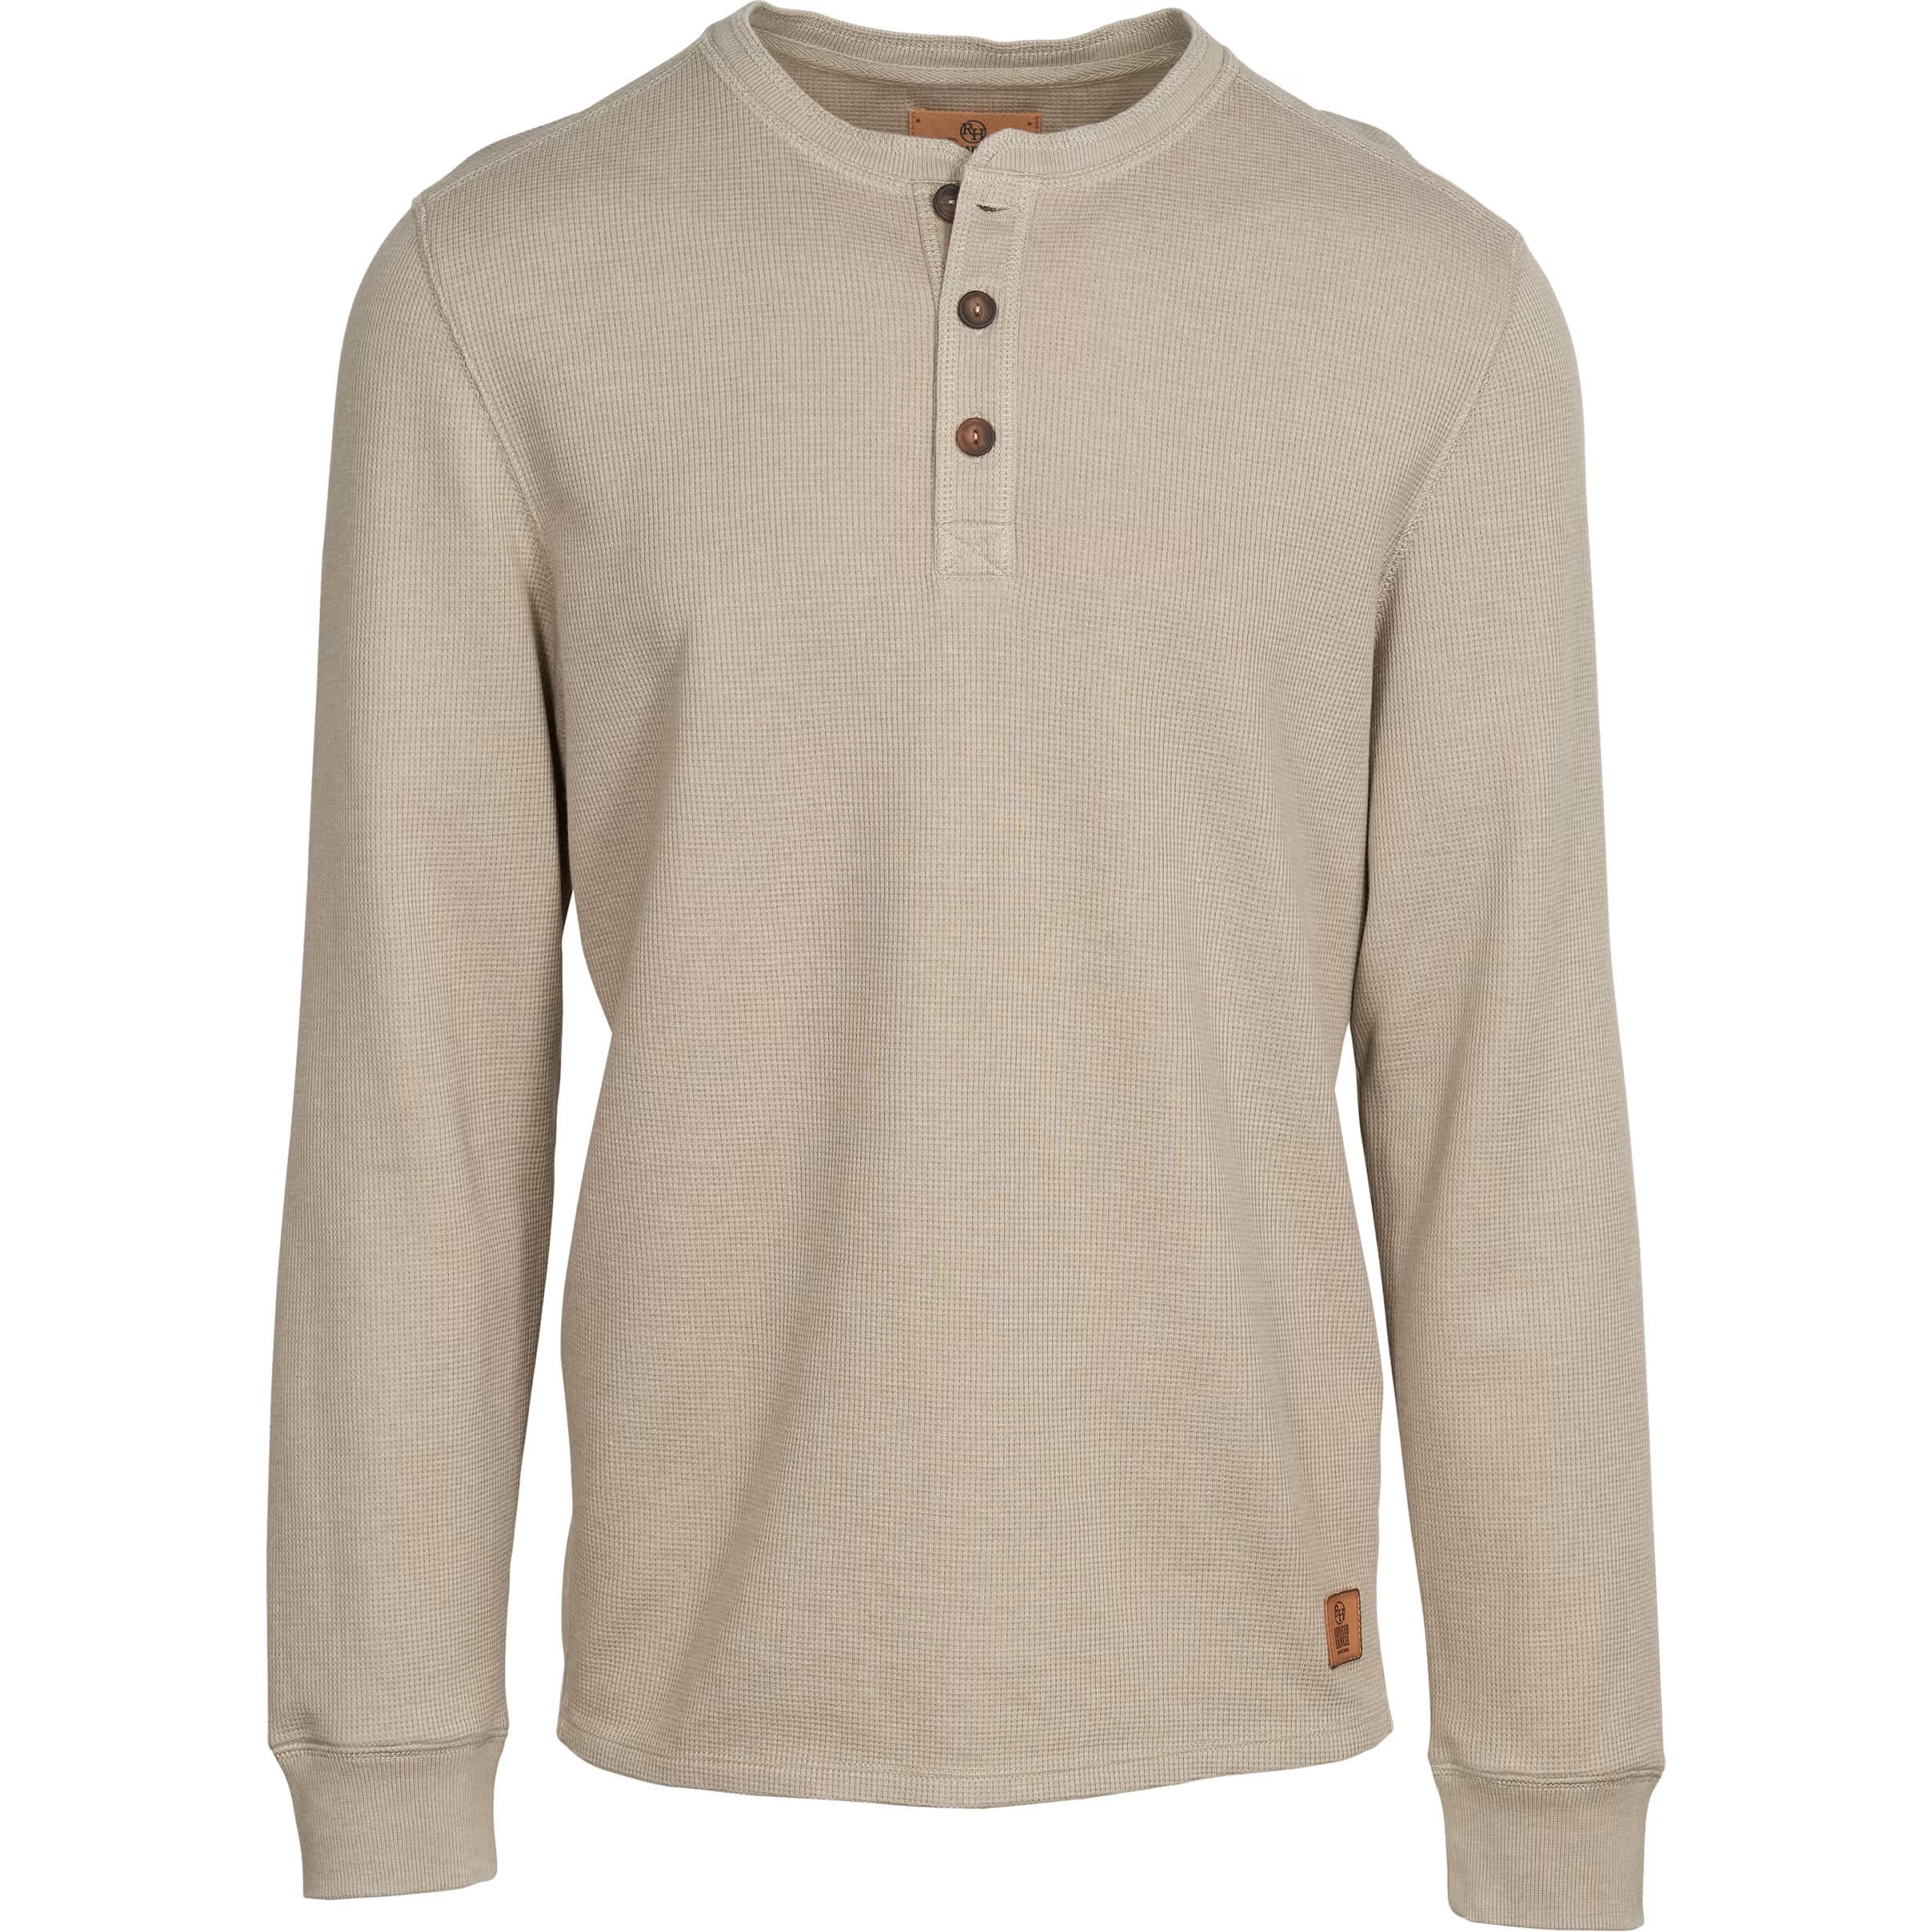 RedHead® Men’s Ranch Grand Forks Waffle-Knit Long-Sleeve Henley